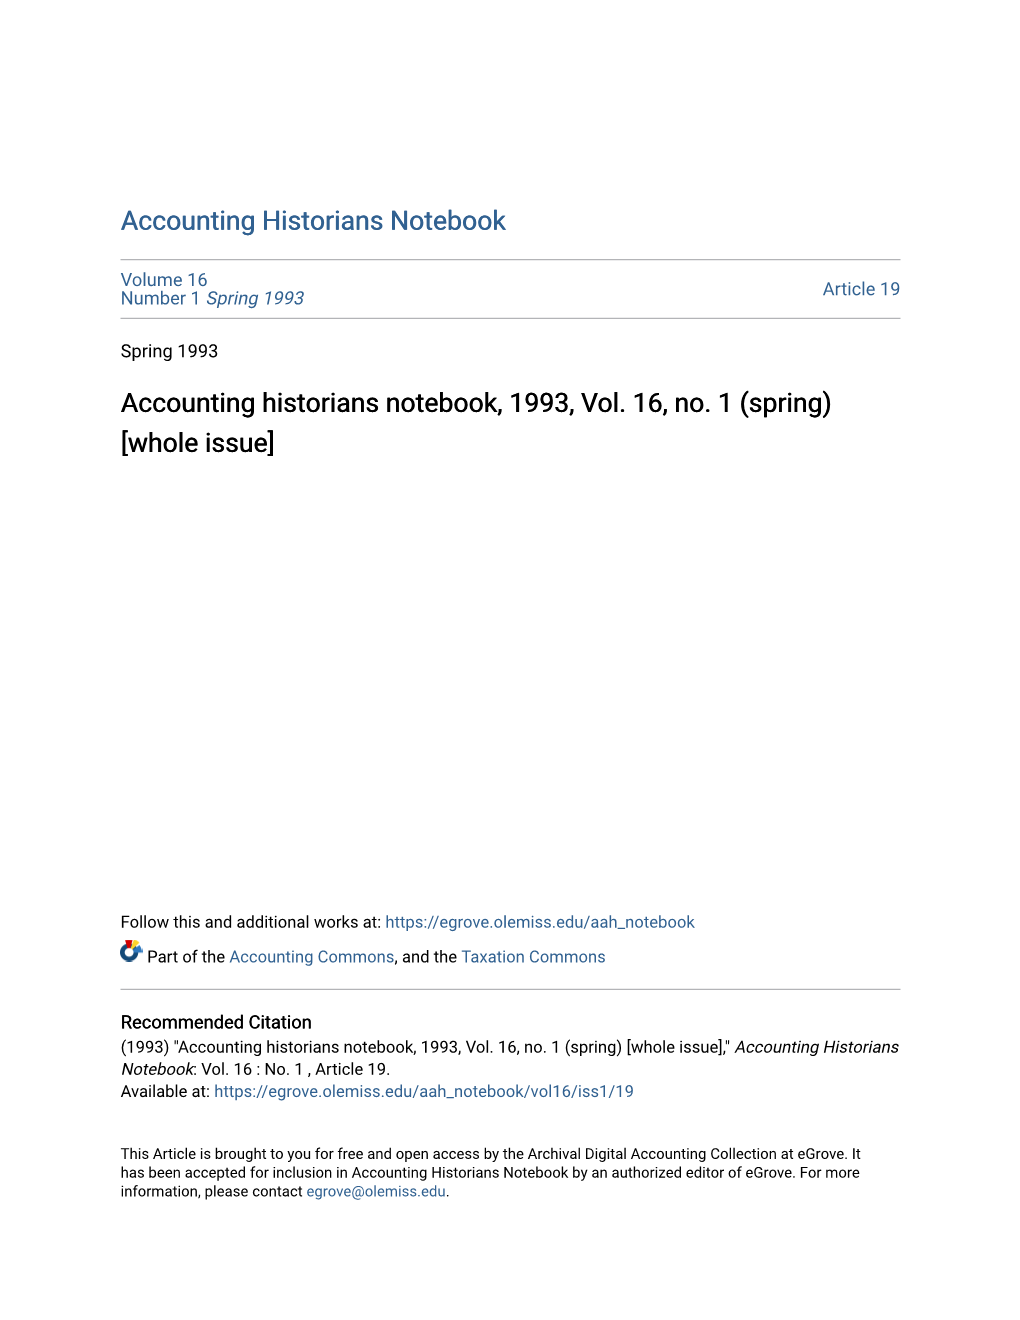 Accounting Historians Notebook, 1993, Vol. 16, No. 1 (Spring) [Whole Issue]